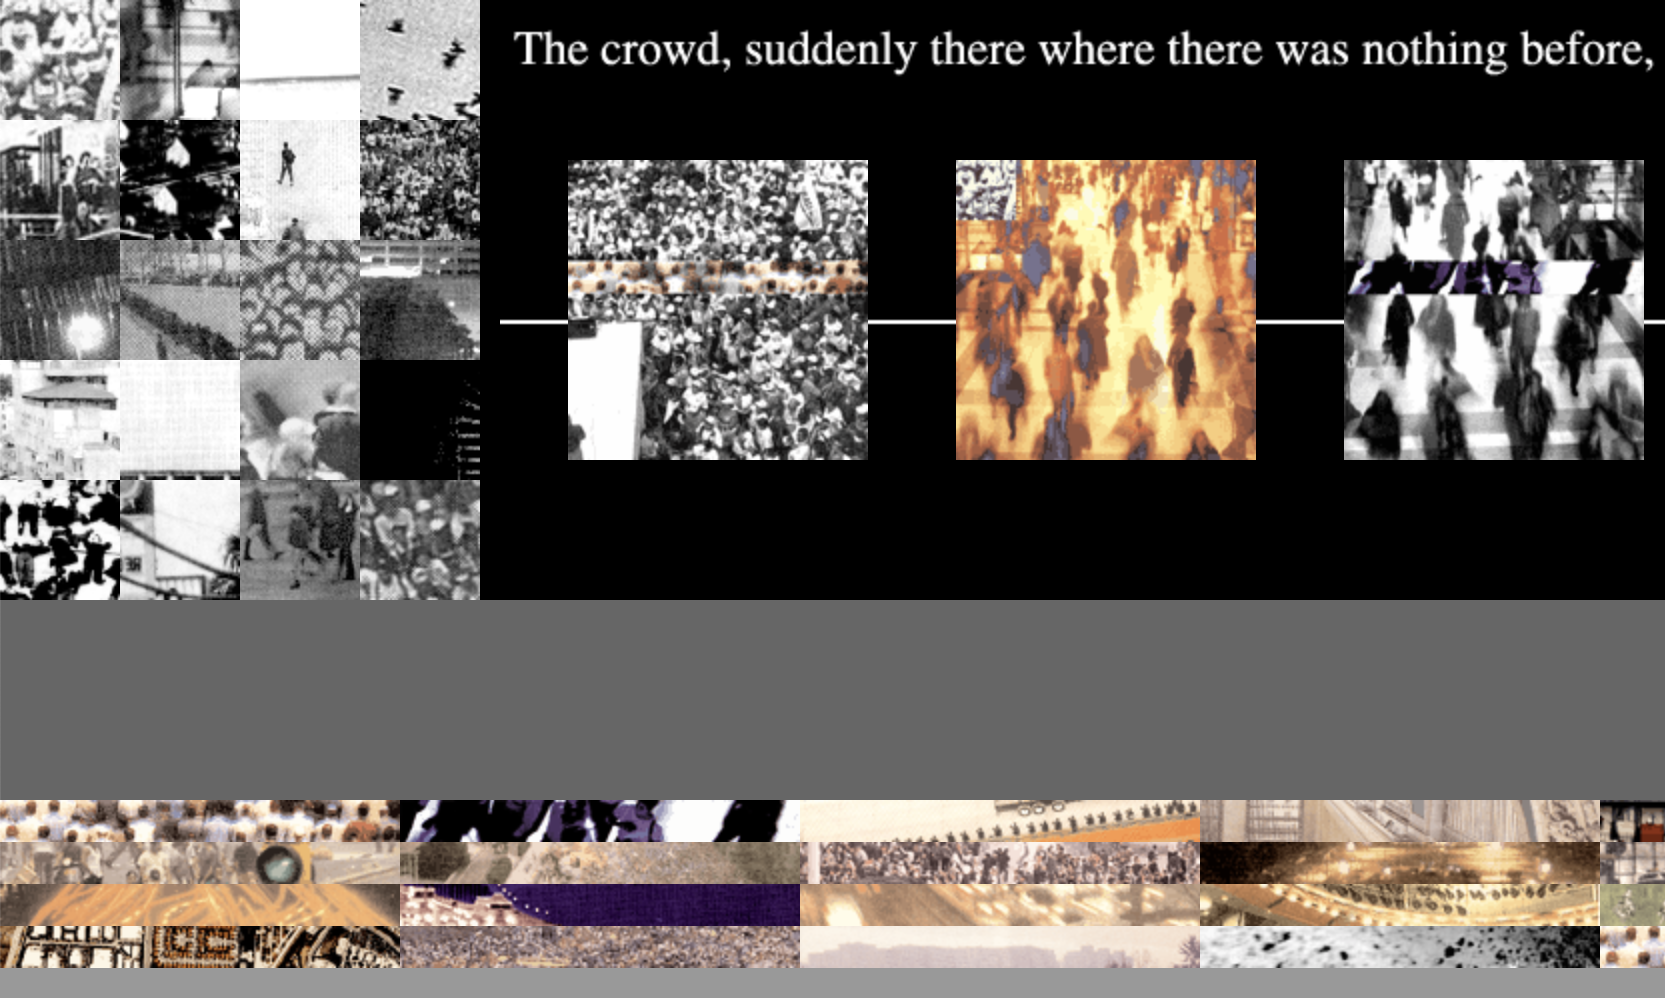 Screenshot of a webpage with a grid of square images in the top left, 3 square images leading off screen in the top right over black with text that says "The crowd, suddenly there where there was nothing before", with gray behind and a smaller grid of images across the bottom.